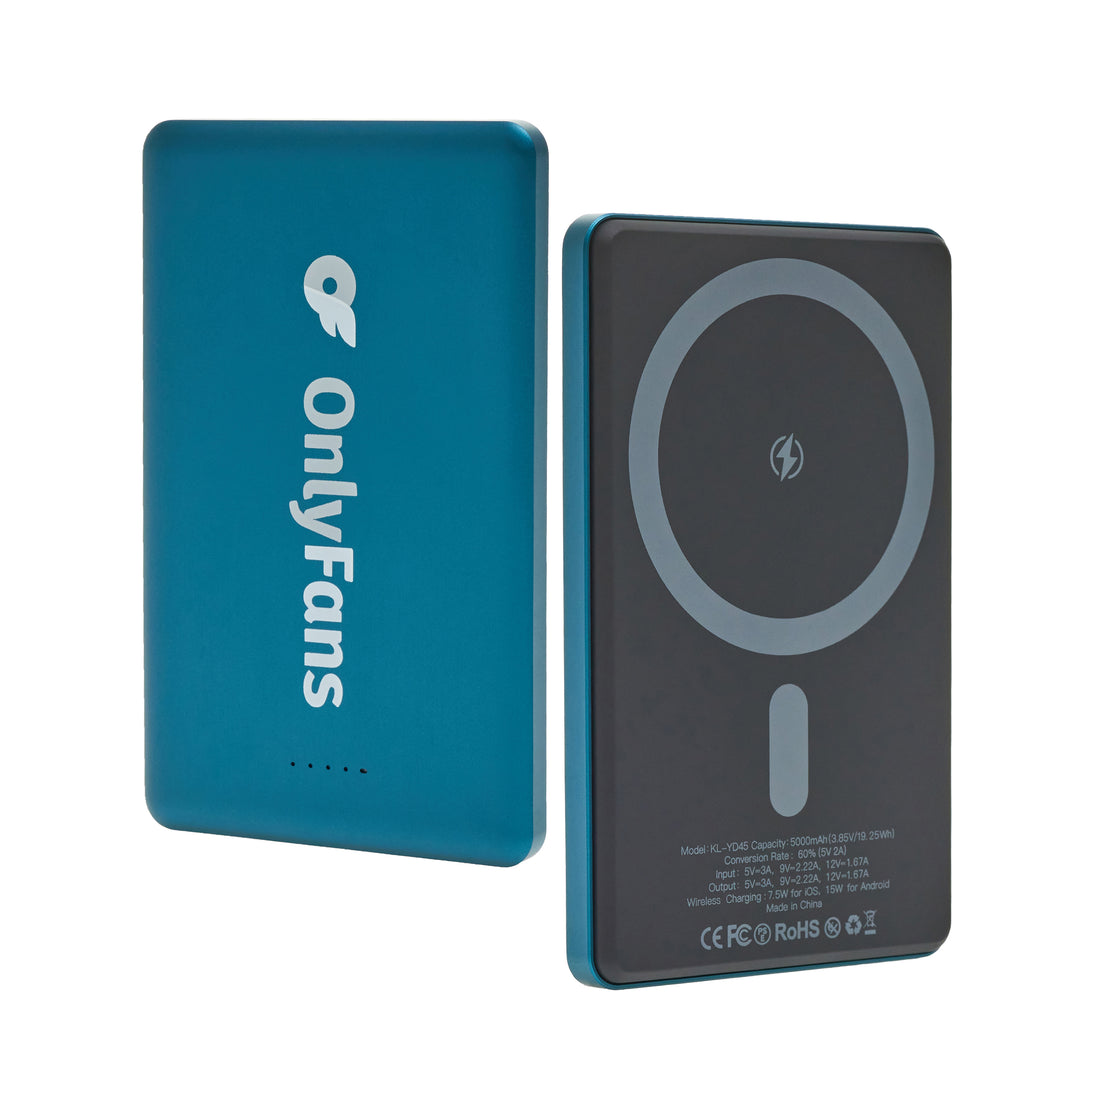 OnlyFans Magnetic Power Bank - Blue